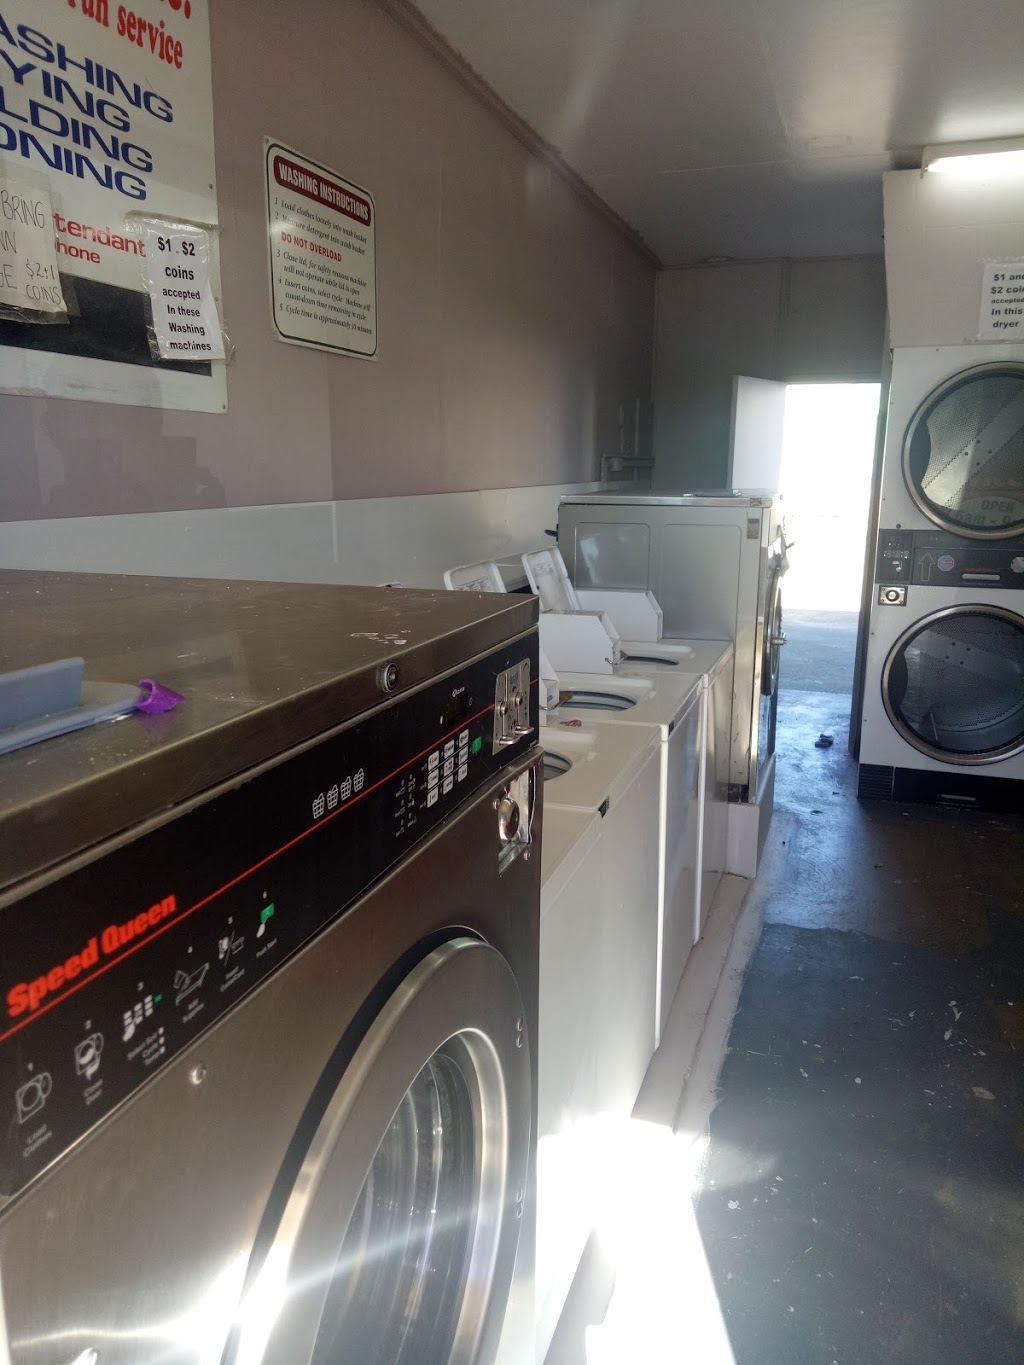 Take Care Laundry Service | laundry | 4/46 Beerburrum Rd, Caboolture QLD 4510, Australia | 0419195306 OR +61 419 195 306